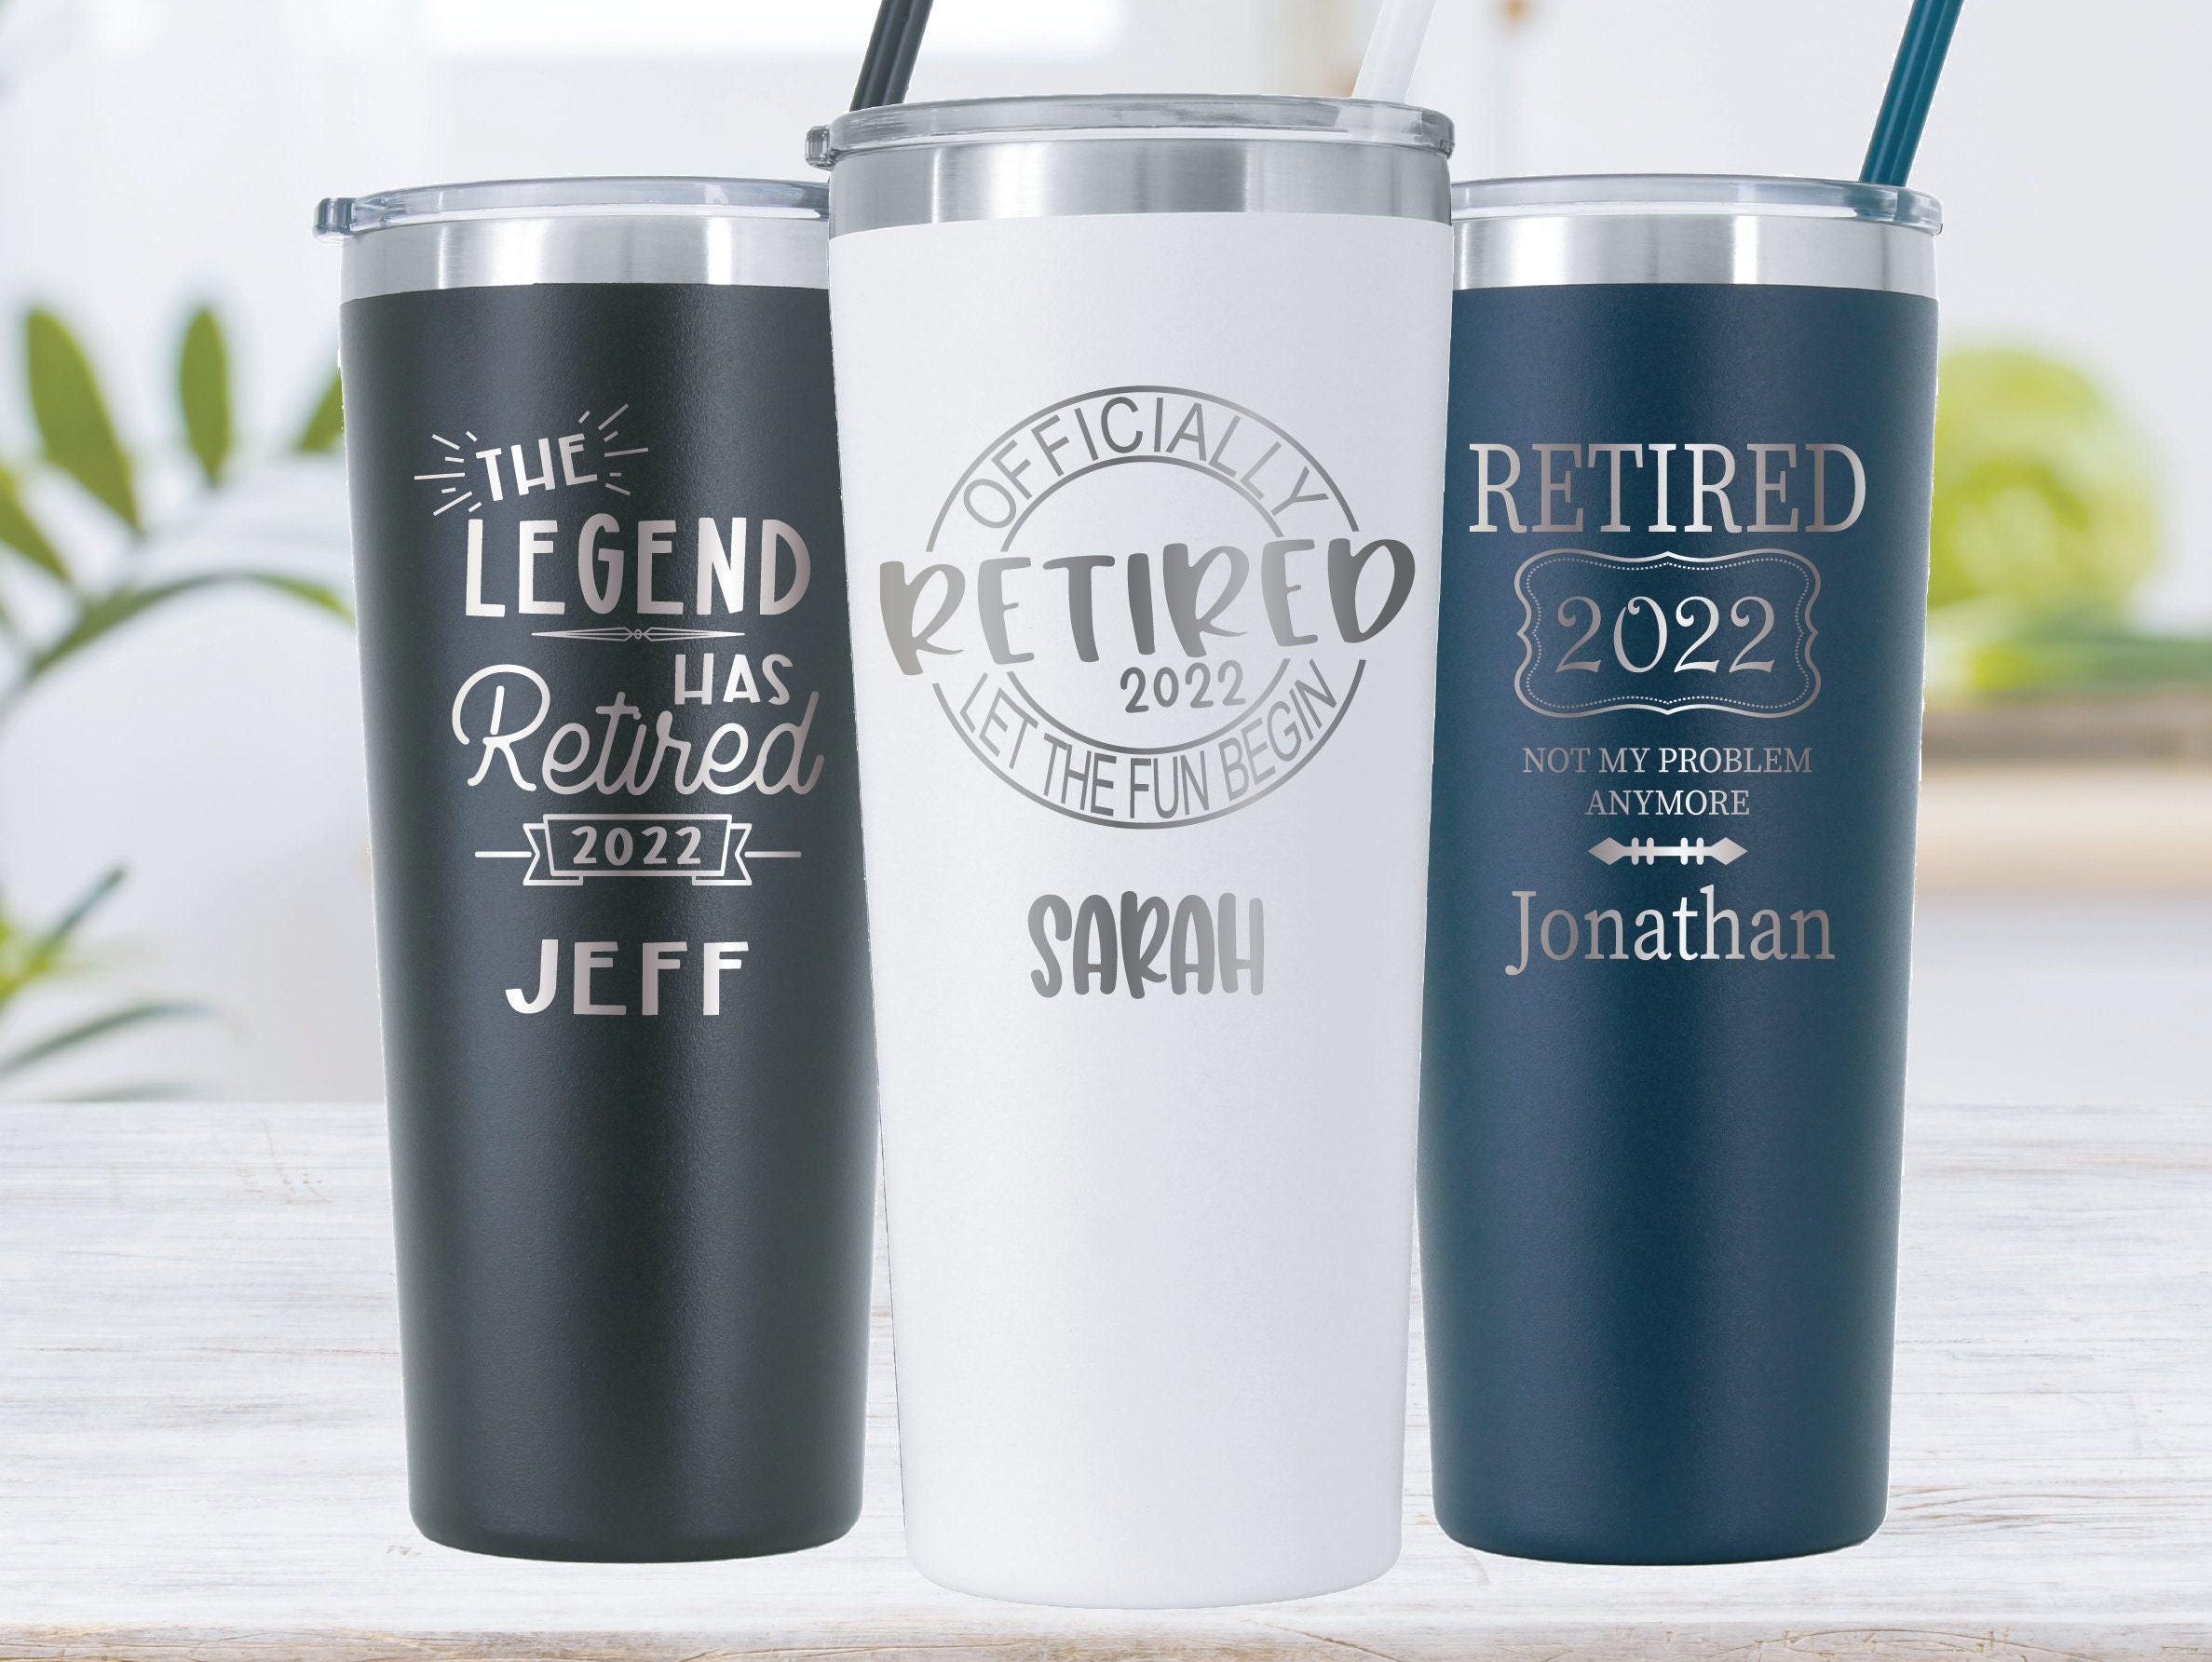 Retirement Gifts for Men Women 2023 - The Legend Has Retired - 20oz  American Flag Tumbler - Funny Happy Retirement Gifts, Engraved Retired  Gifts, Retirement Gag Gifts for Men, Him, Husband, Coworker